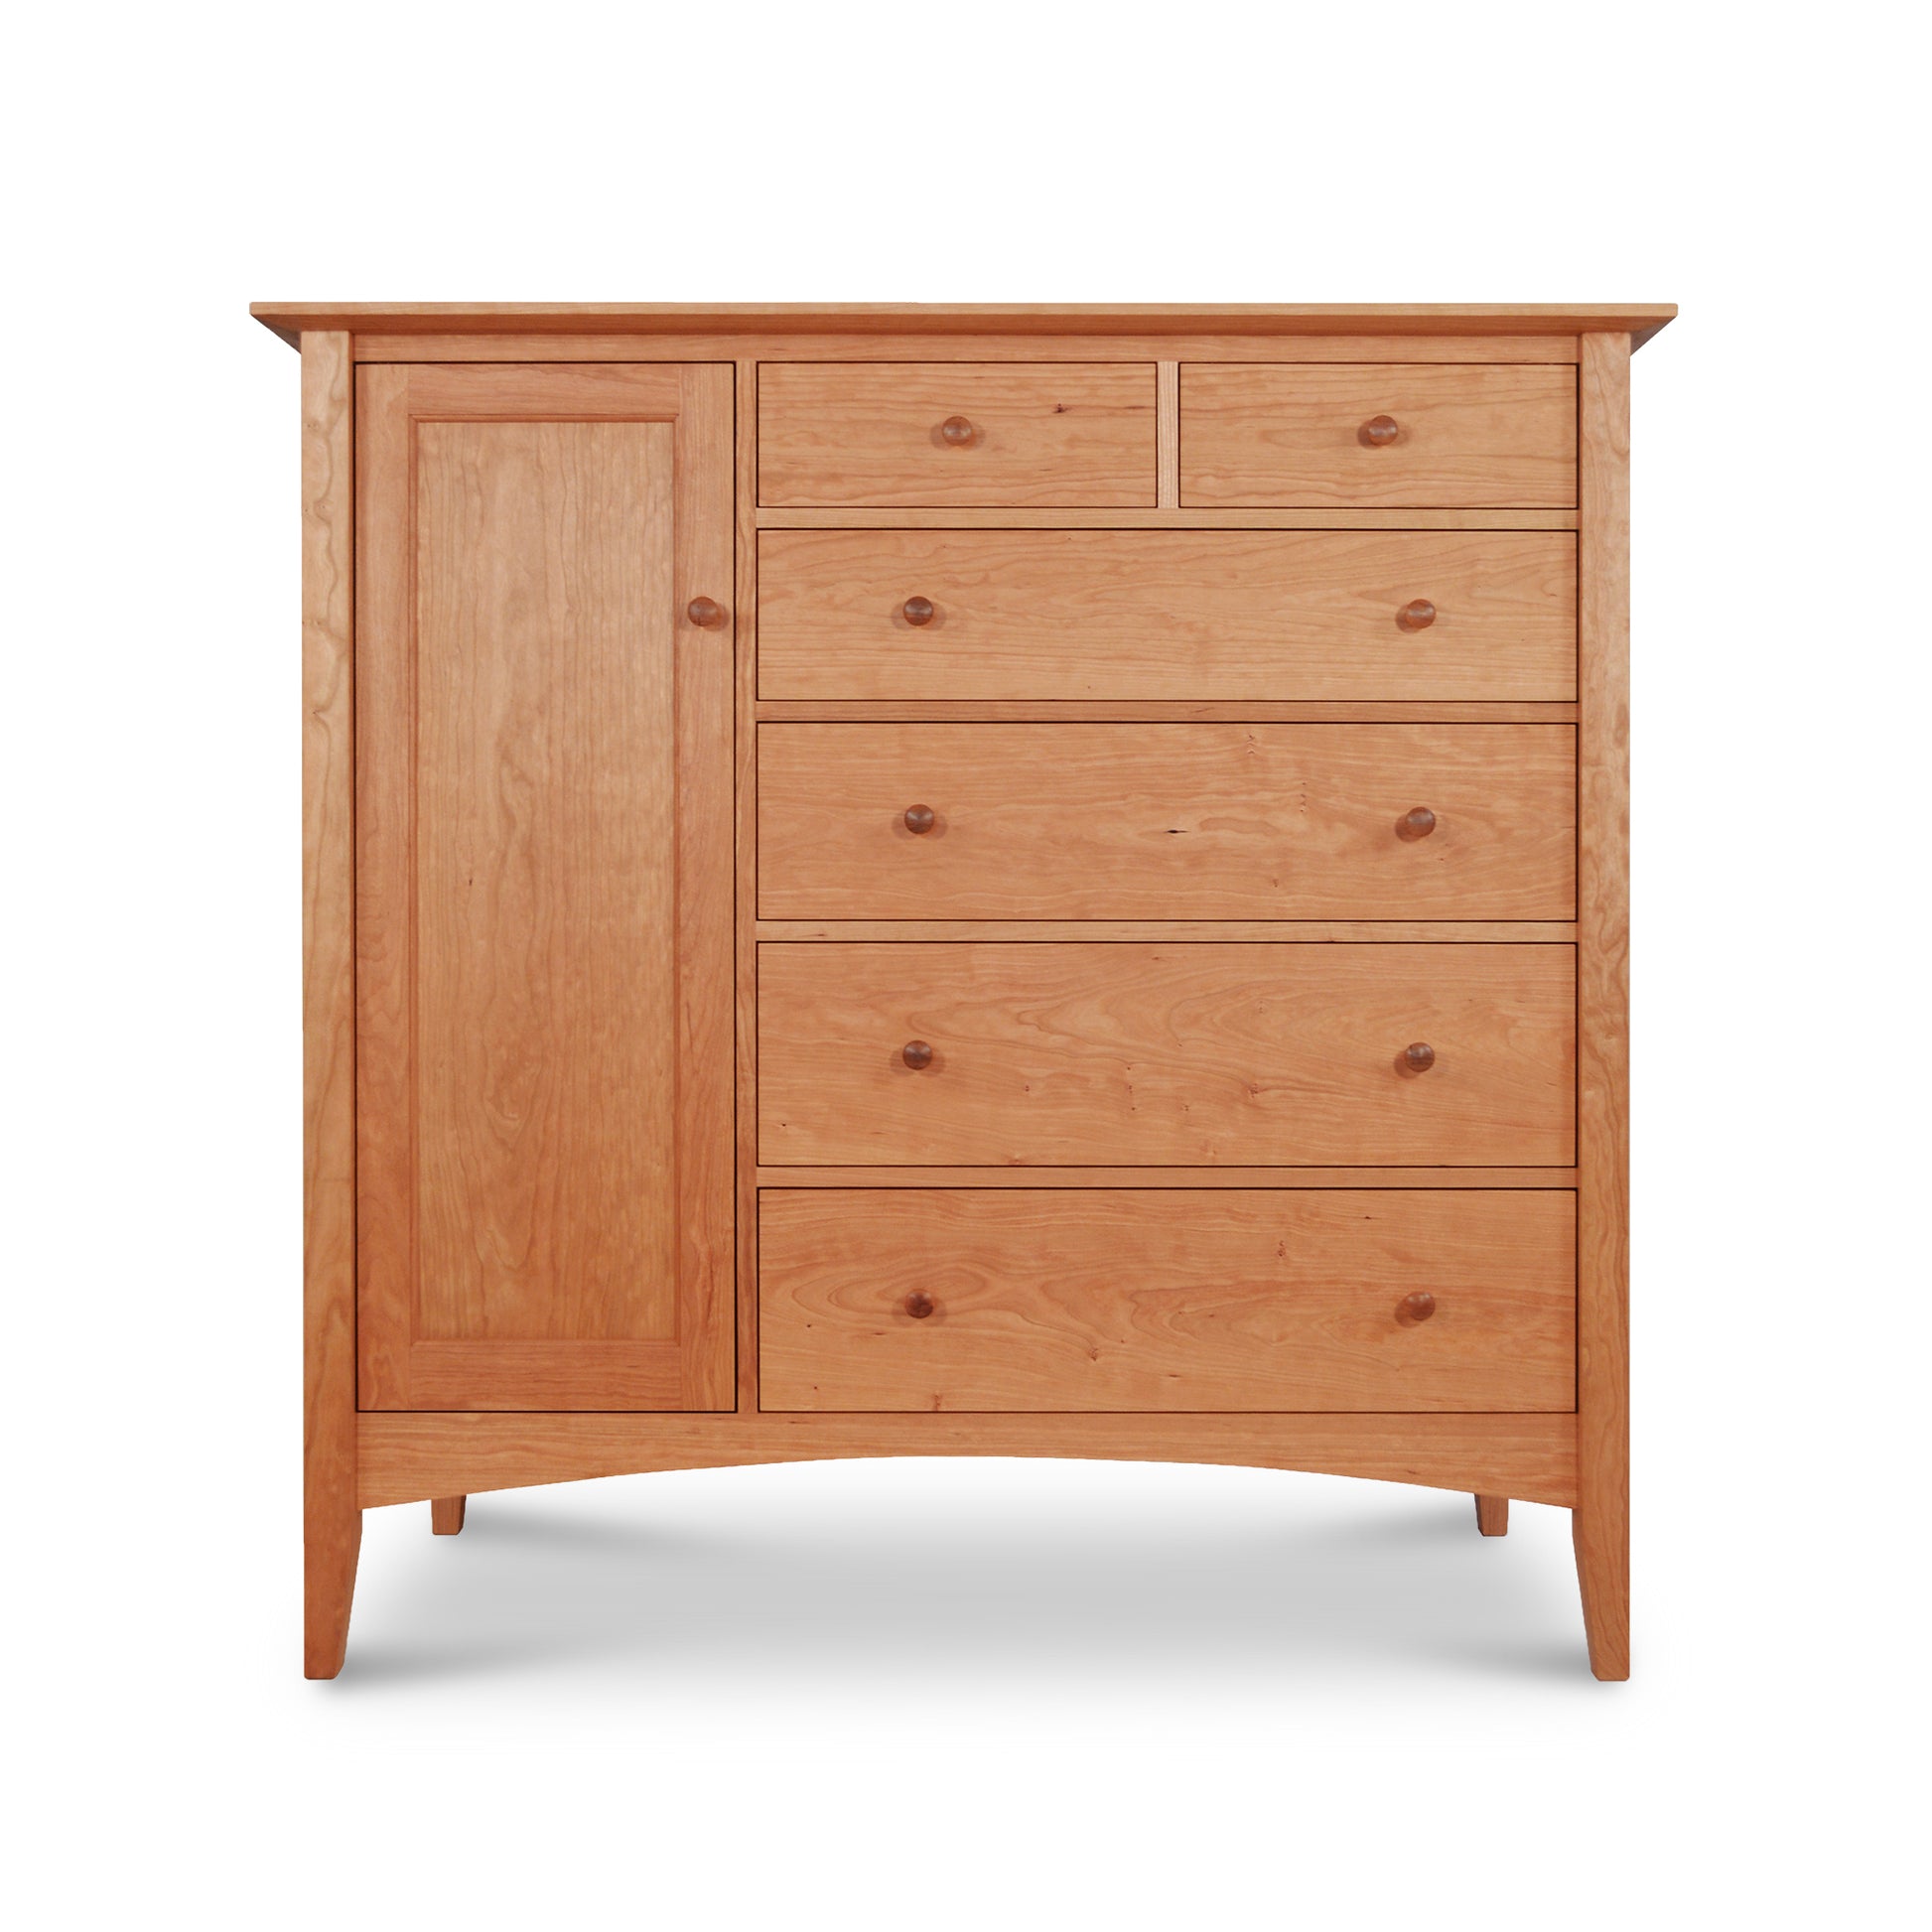 An upscale bedroom dresser showcasing Maple Corner Woodworks craftsmanship, featuring drawers and a door. The product is called the American Shaker Gent's Chest.